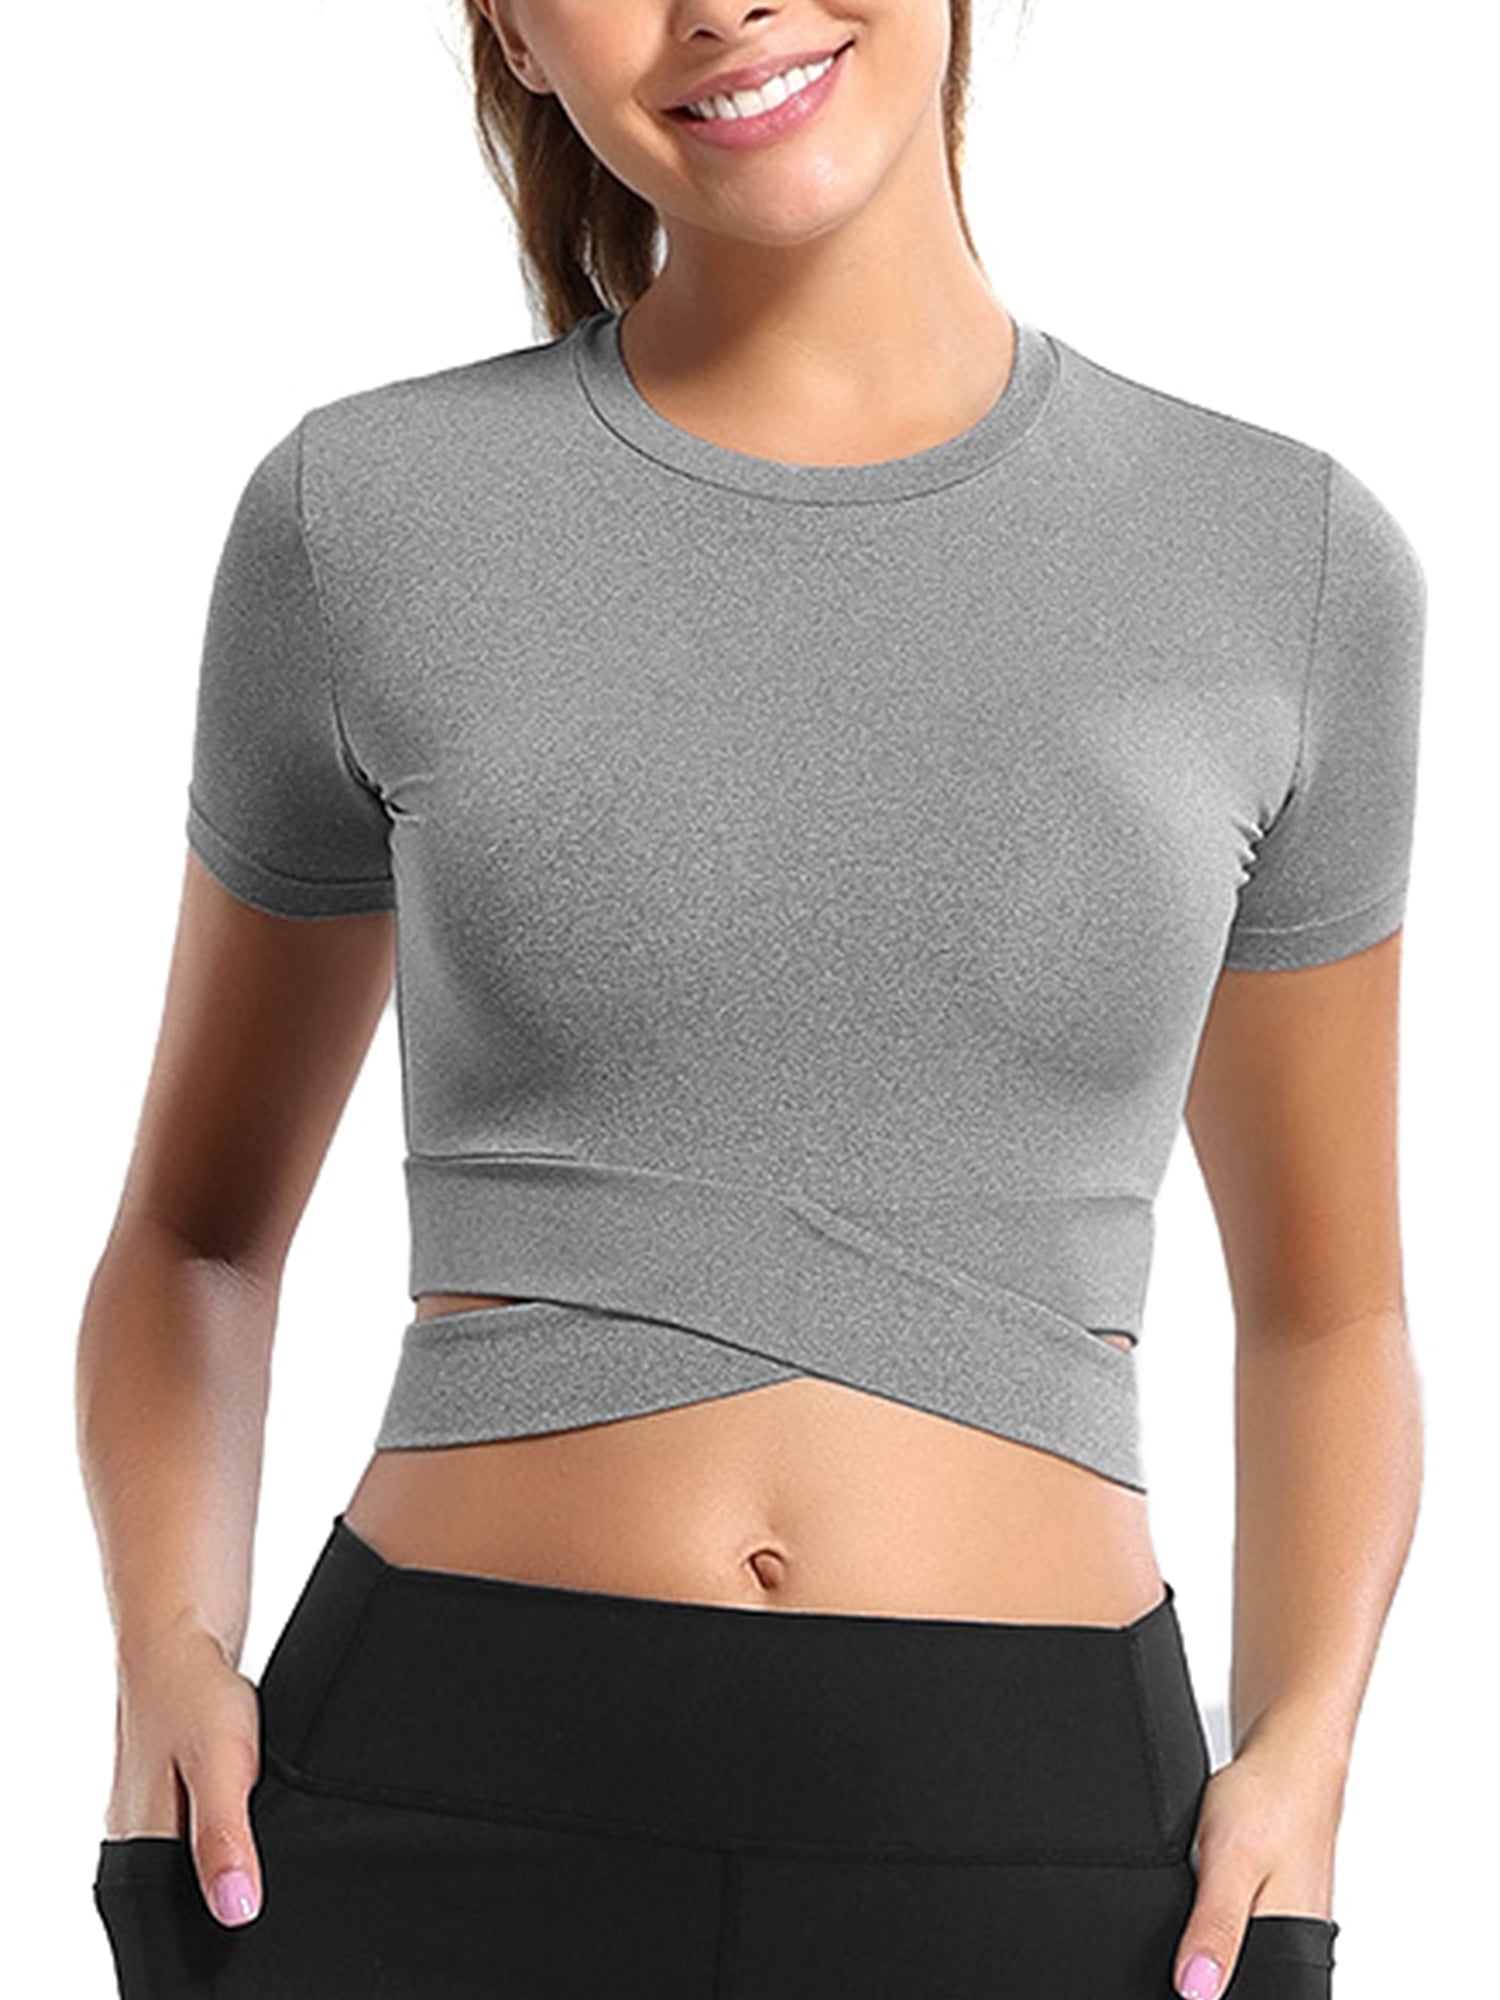 Women's Workout Shirts Crop Top Workout Gym Exercise Clothes for